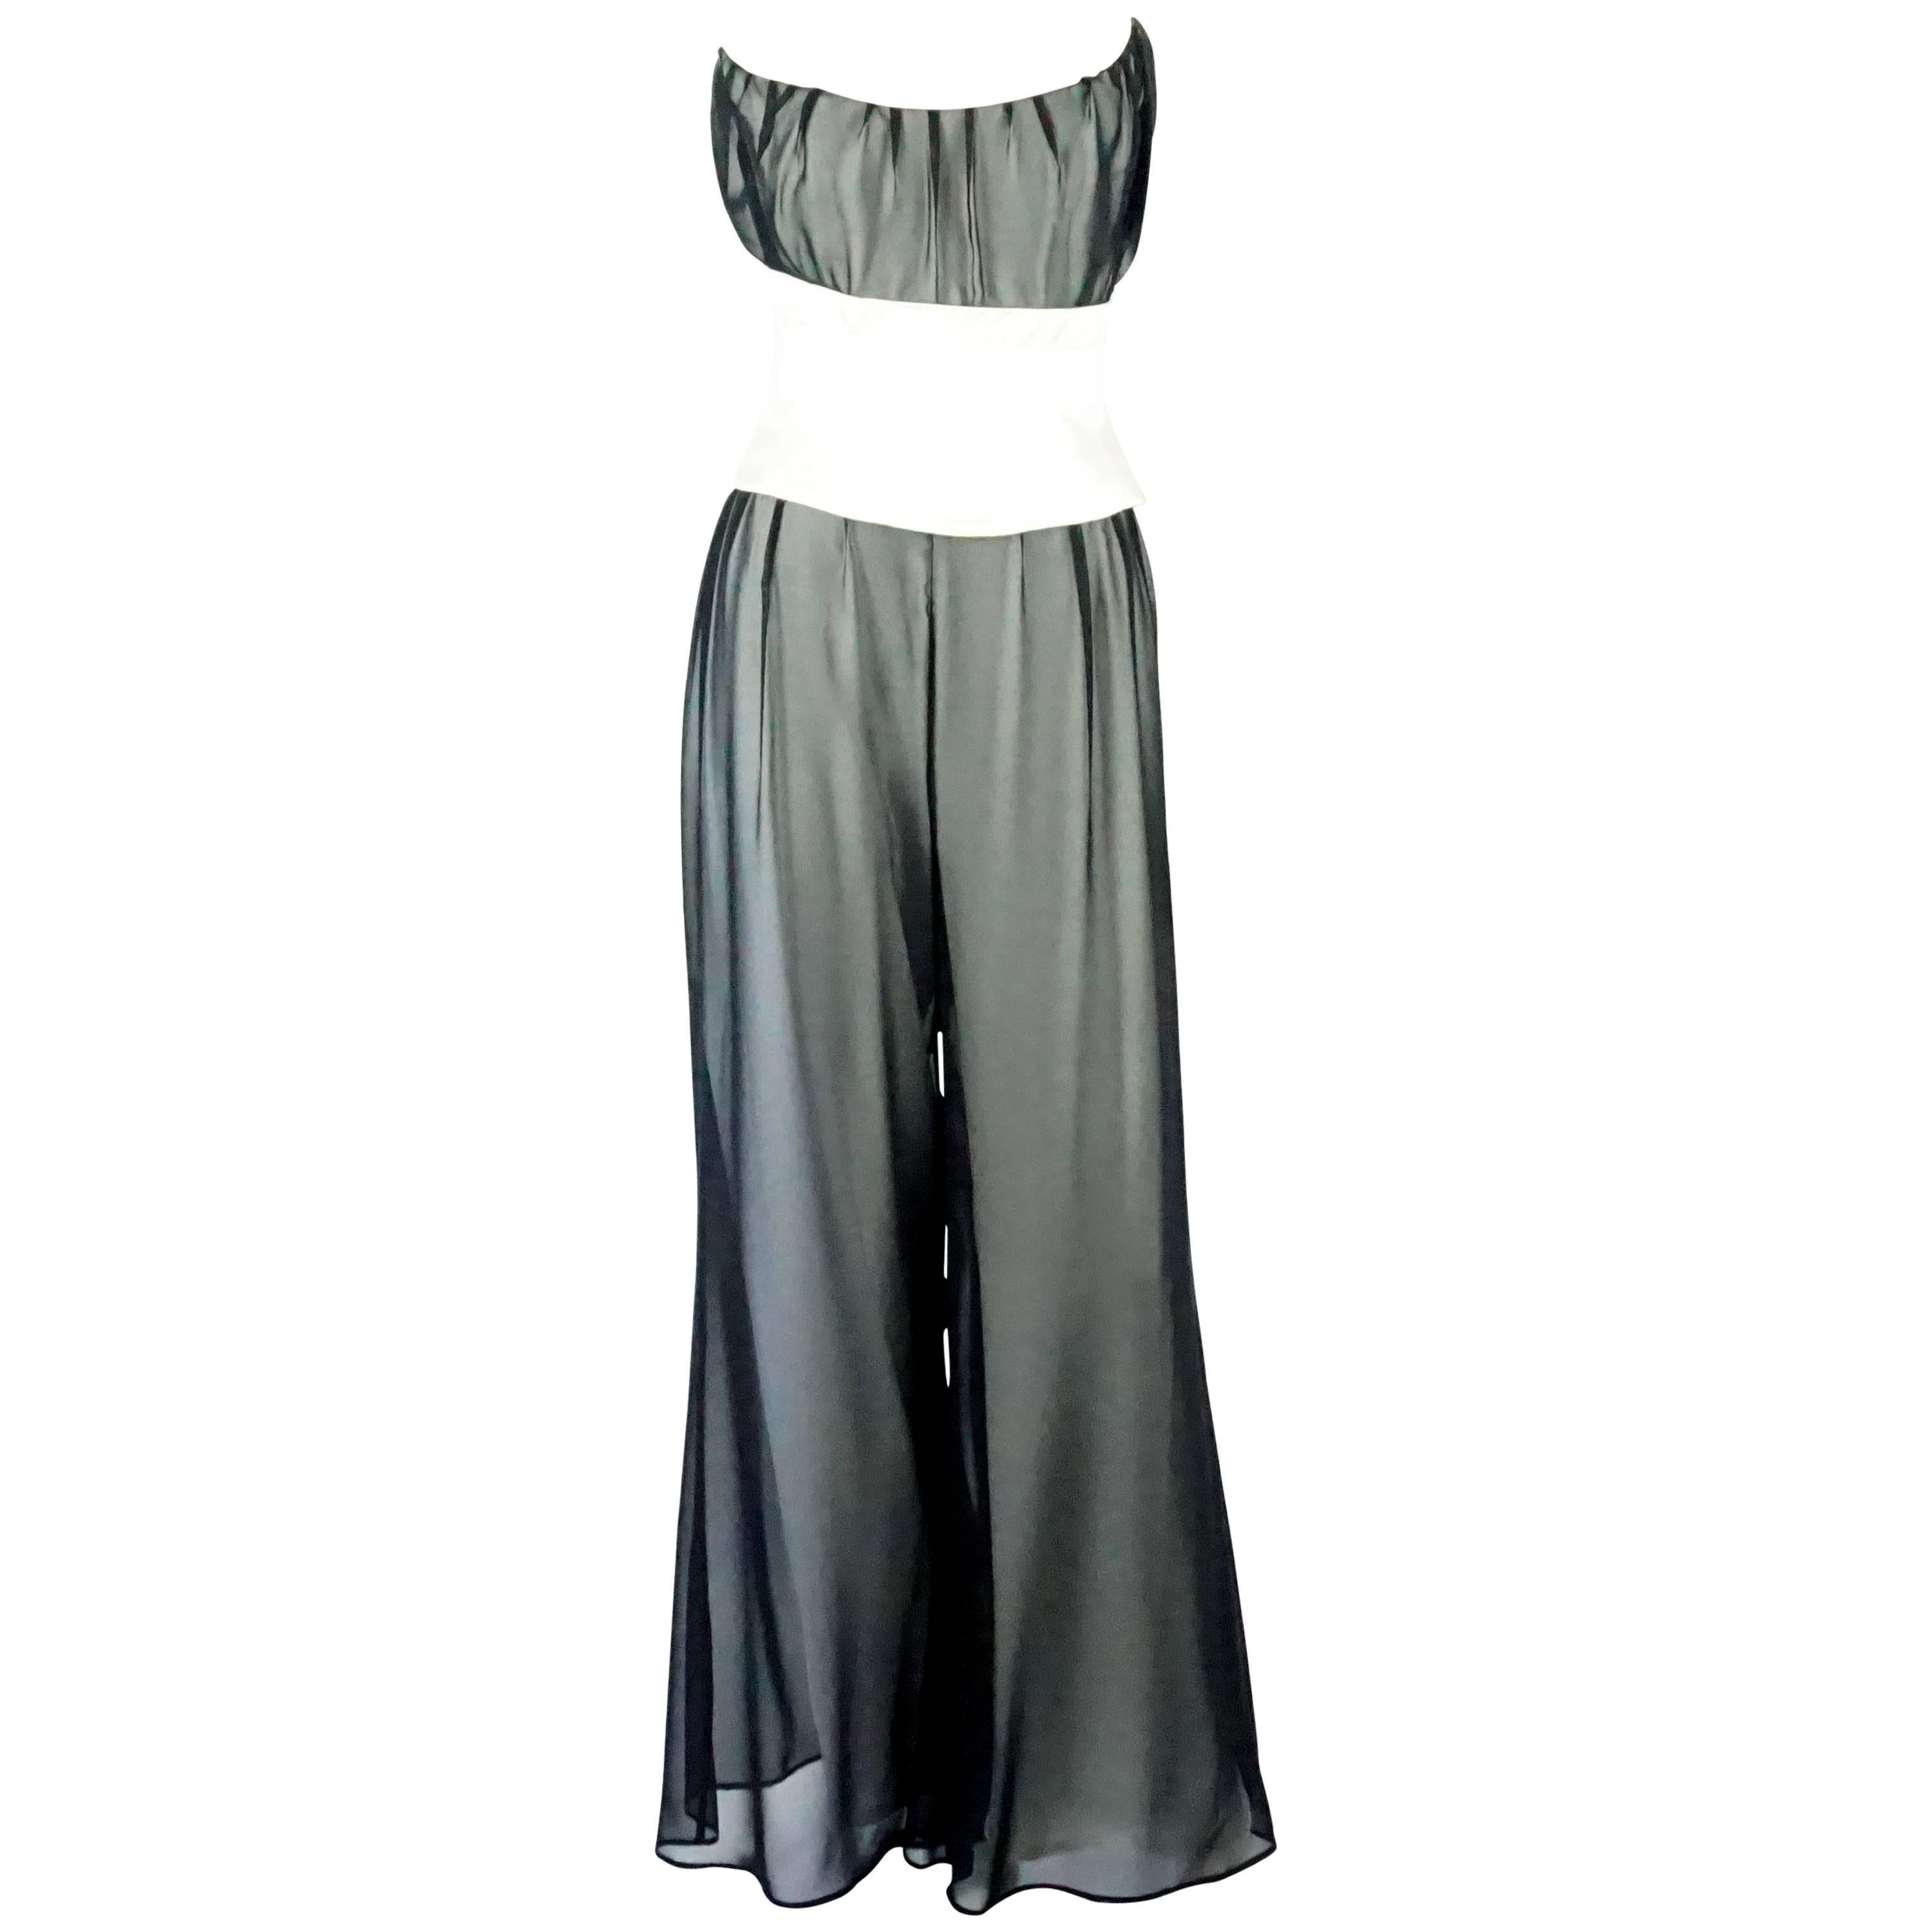 Thierry Mugler Black / White Palazzo Pants Cropped Bustier and Belt, Circa 1980s